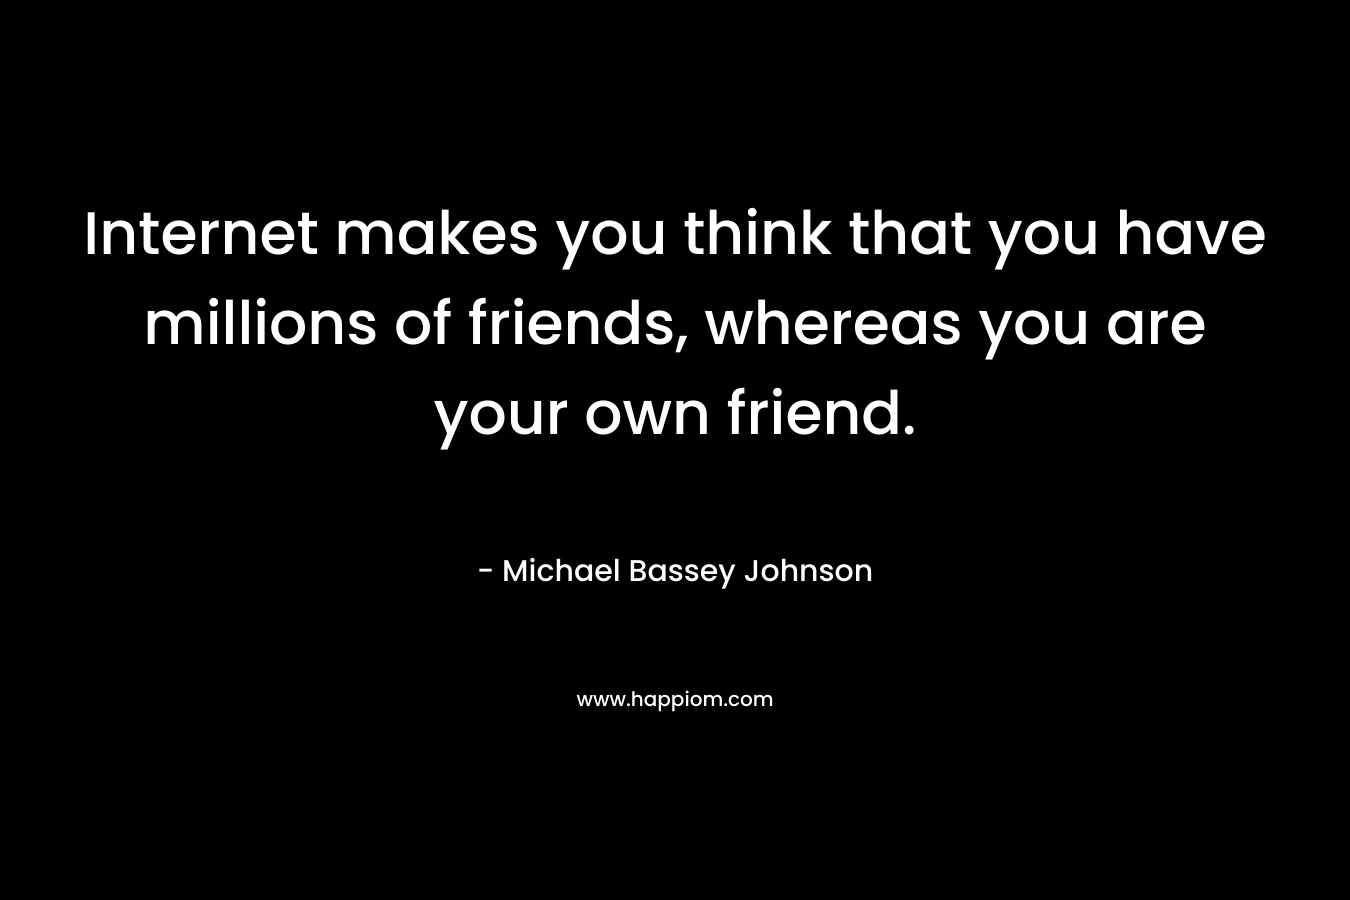 Internet makes you think that you have millions of friends, whereas you are your own friend.